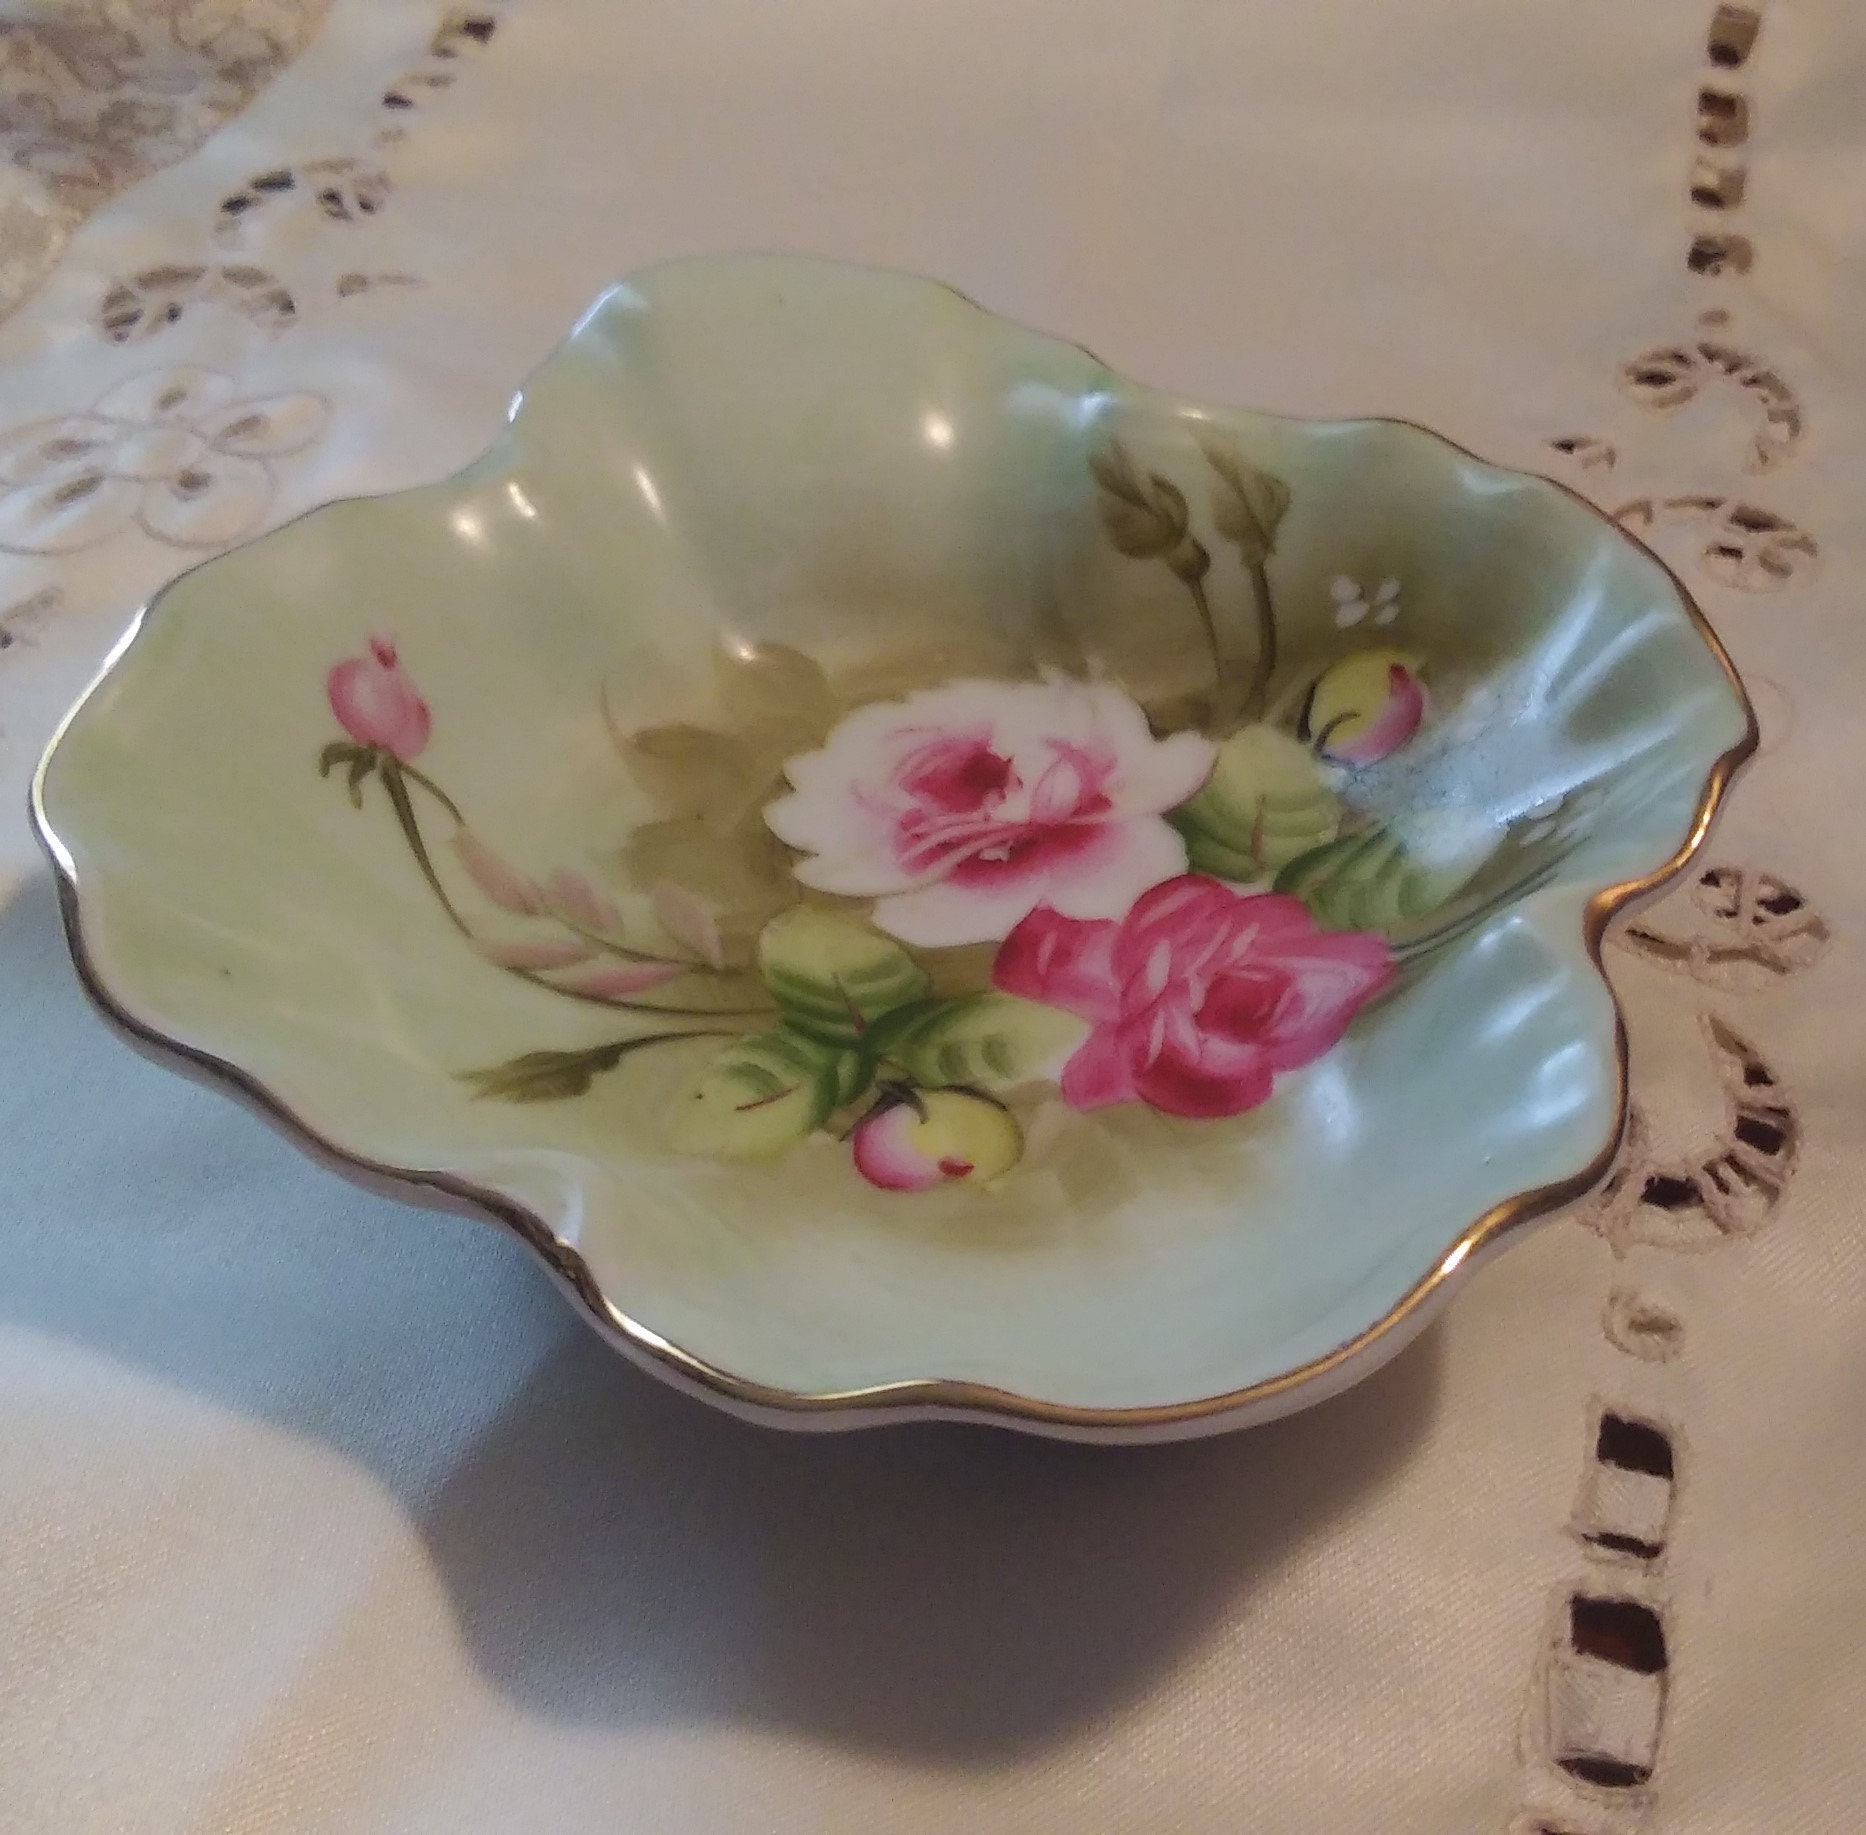 vintage Lefton China small dish with hand painted flowers, golden rim.